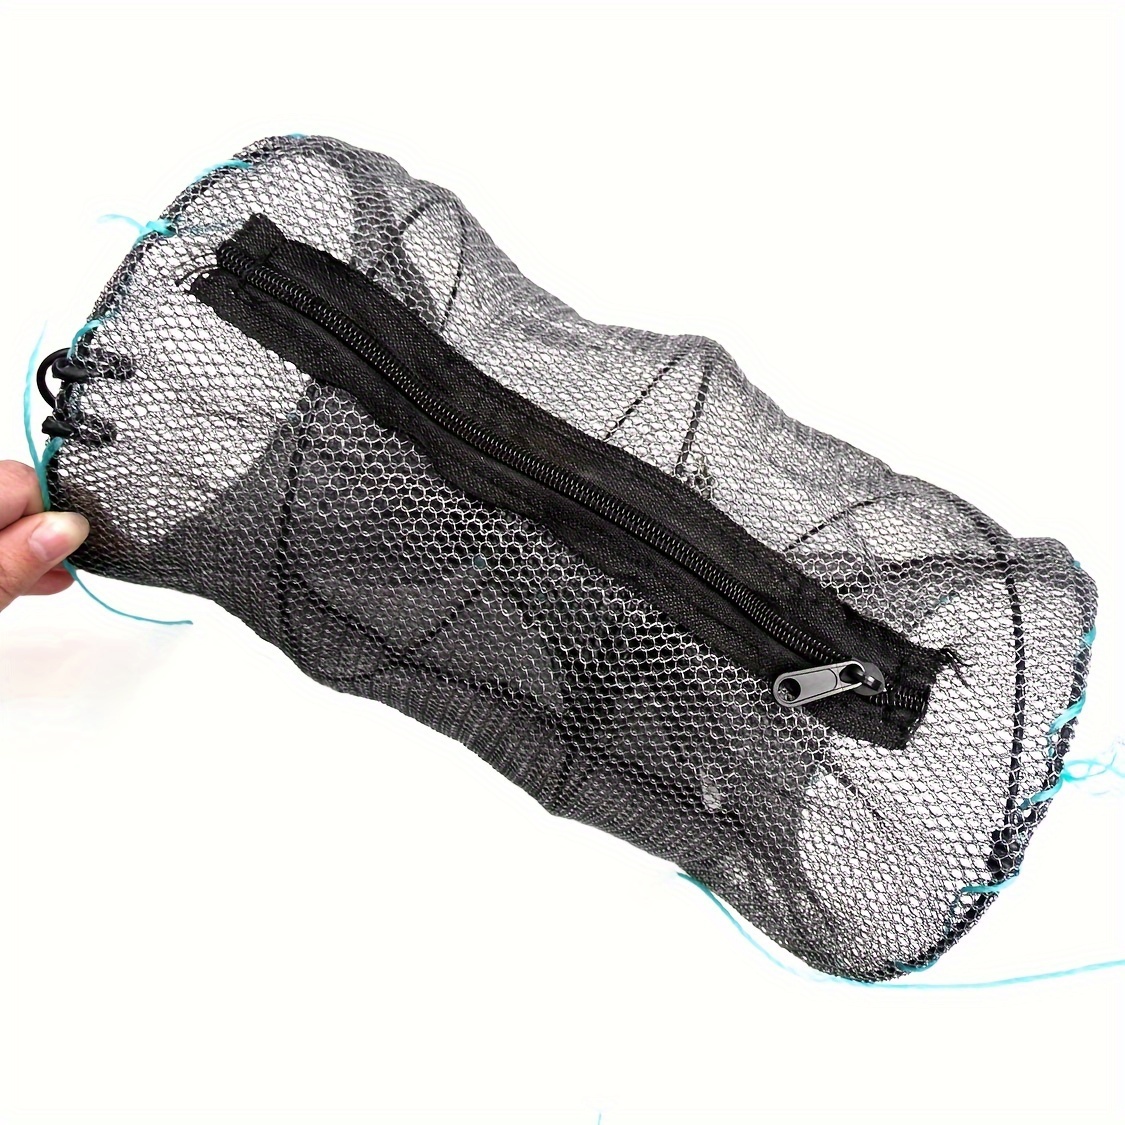 1pc Portable Foldable Fishing Net for Crab, Small Fish, and Crayfish -  Lightweight Fishing Trap Tackle with 24.99*47.98cm/9.84*18.89'' Size